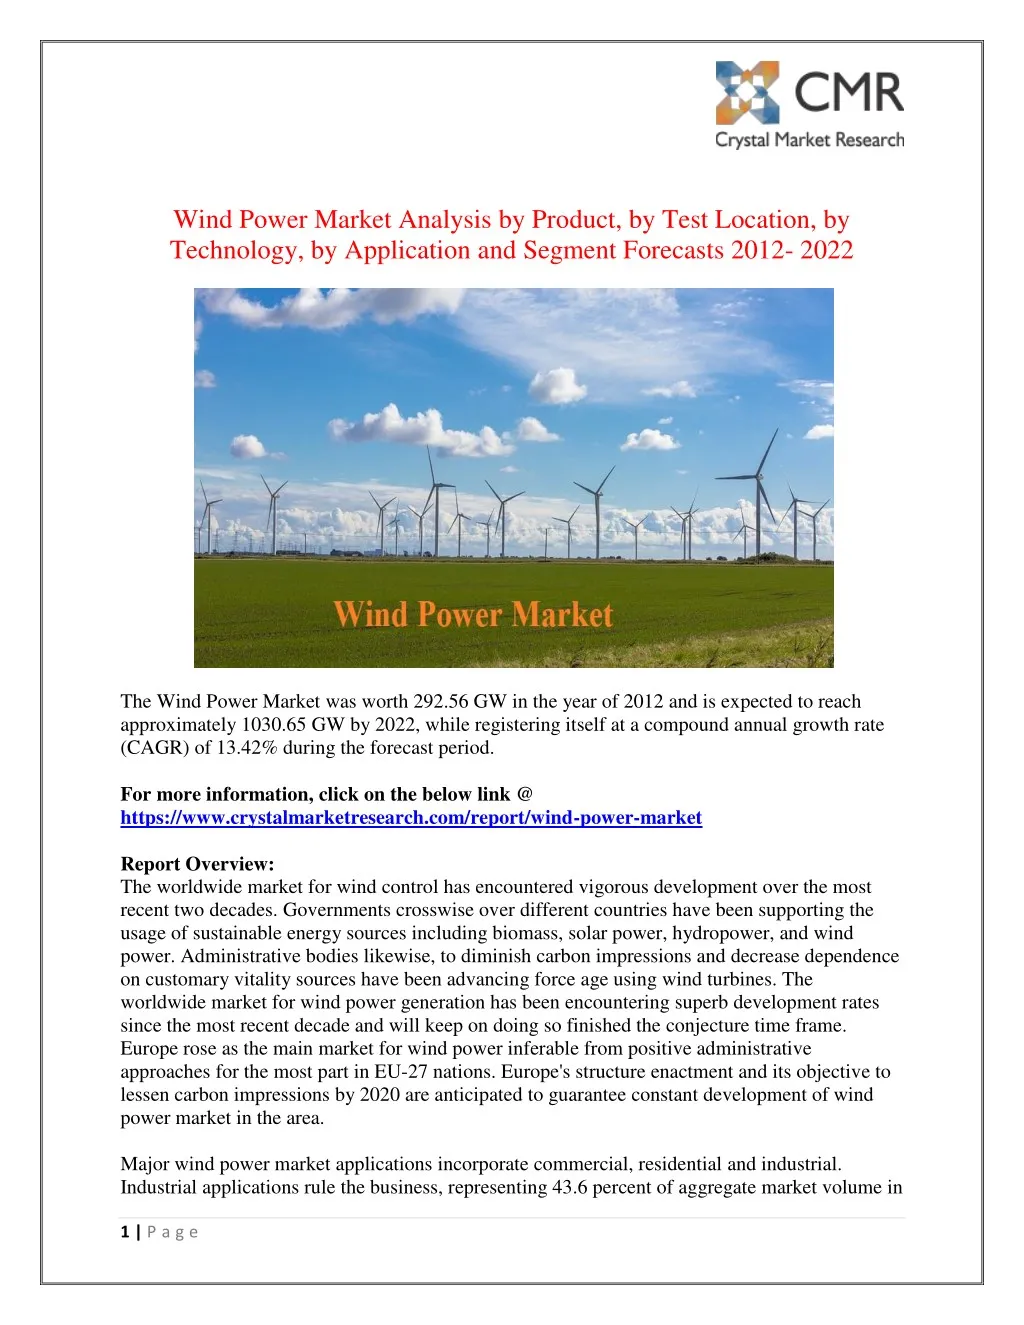 wind power market analysis by product by test